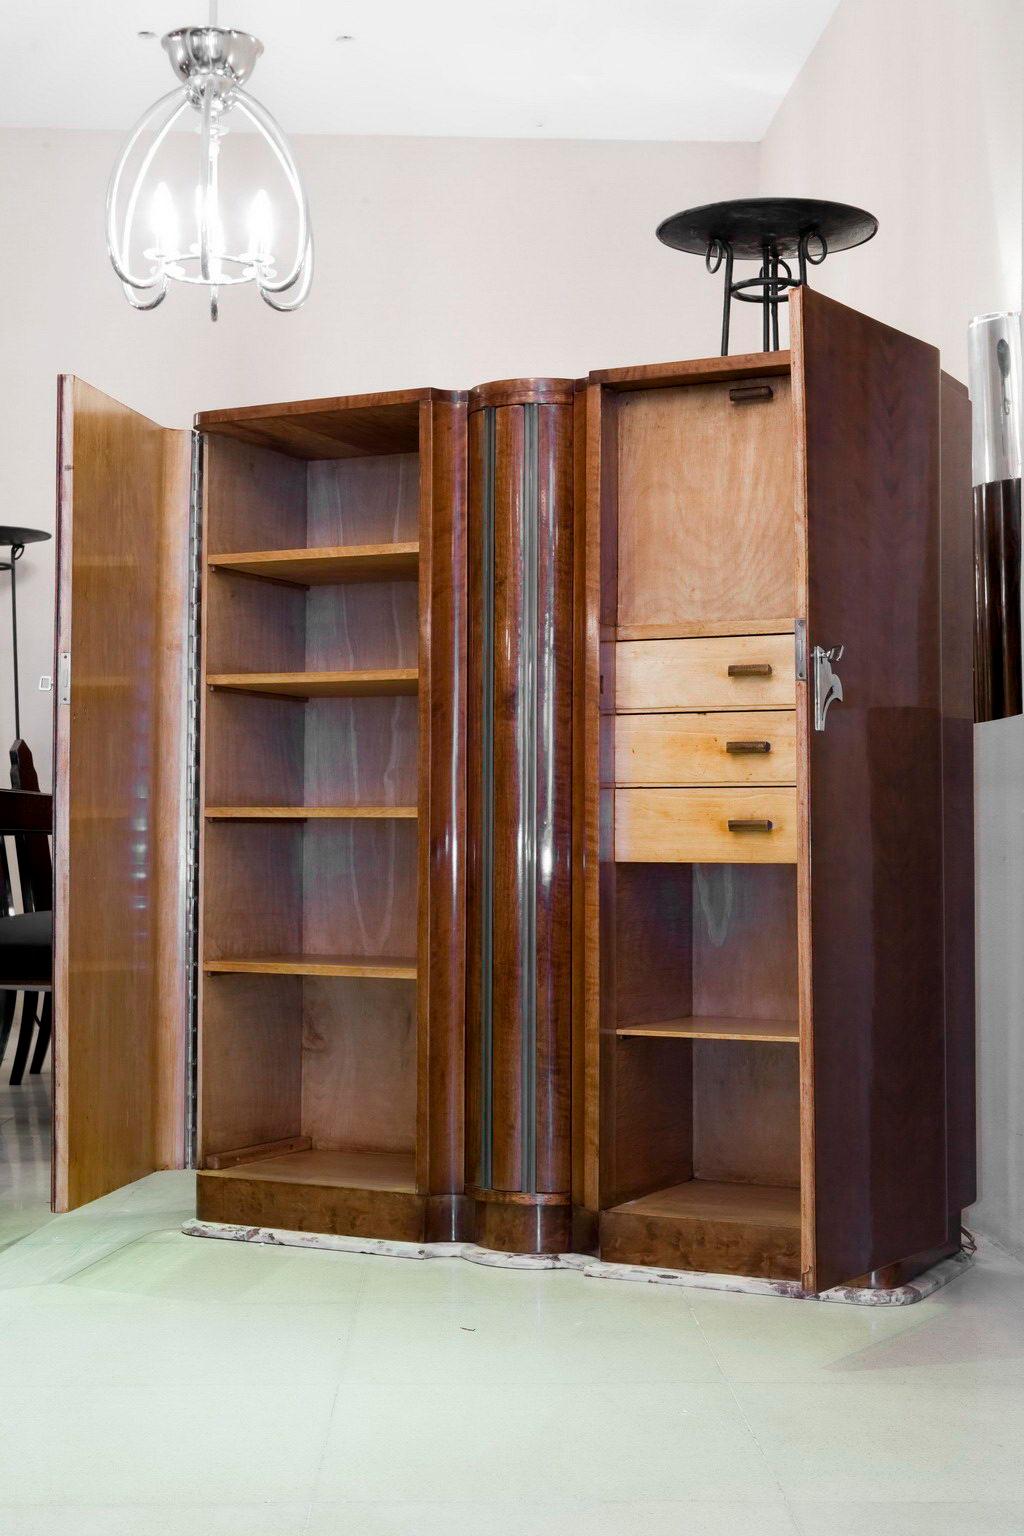 Bookcase with bar

Year: 1930
Country: French
It is an elegant and sophisticated bookcase.
You want to live in the golden years, this is the bookcase that your project needs.
We have specialized in the sale of Art Deco and Art Nouveau styles since